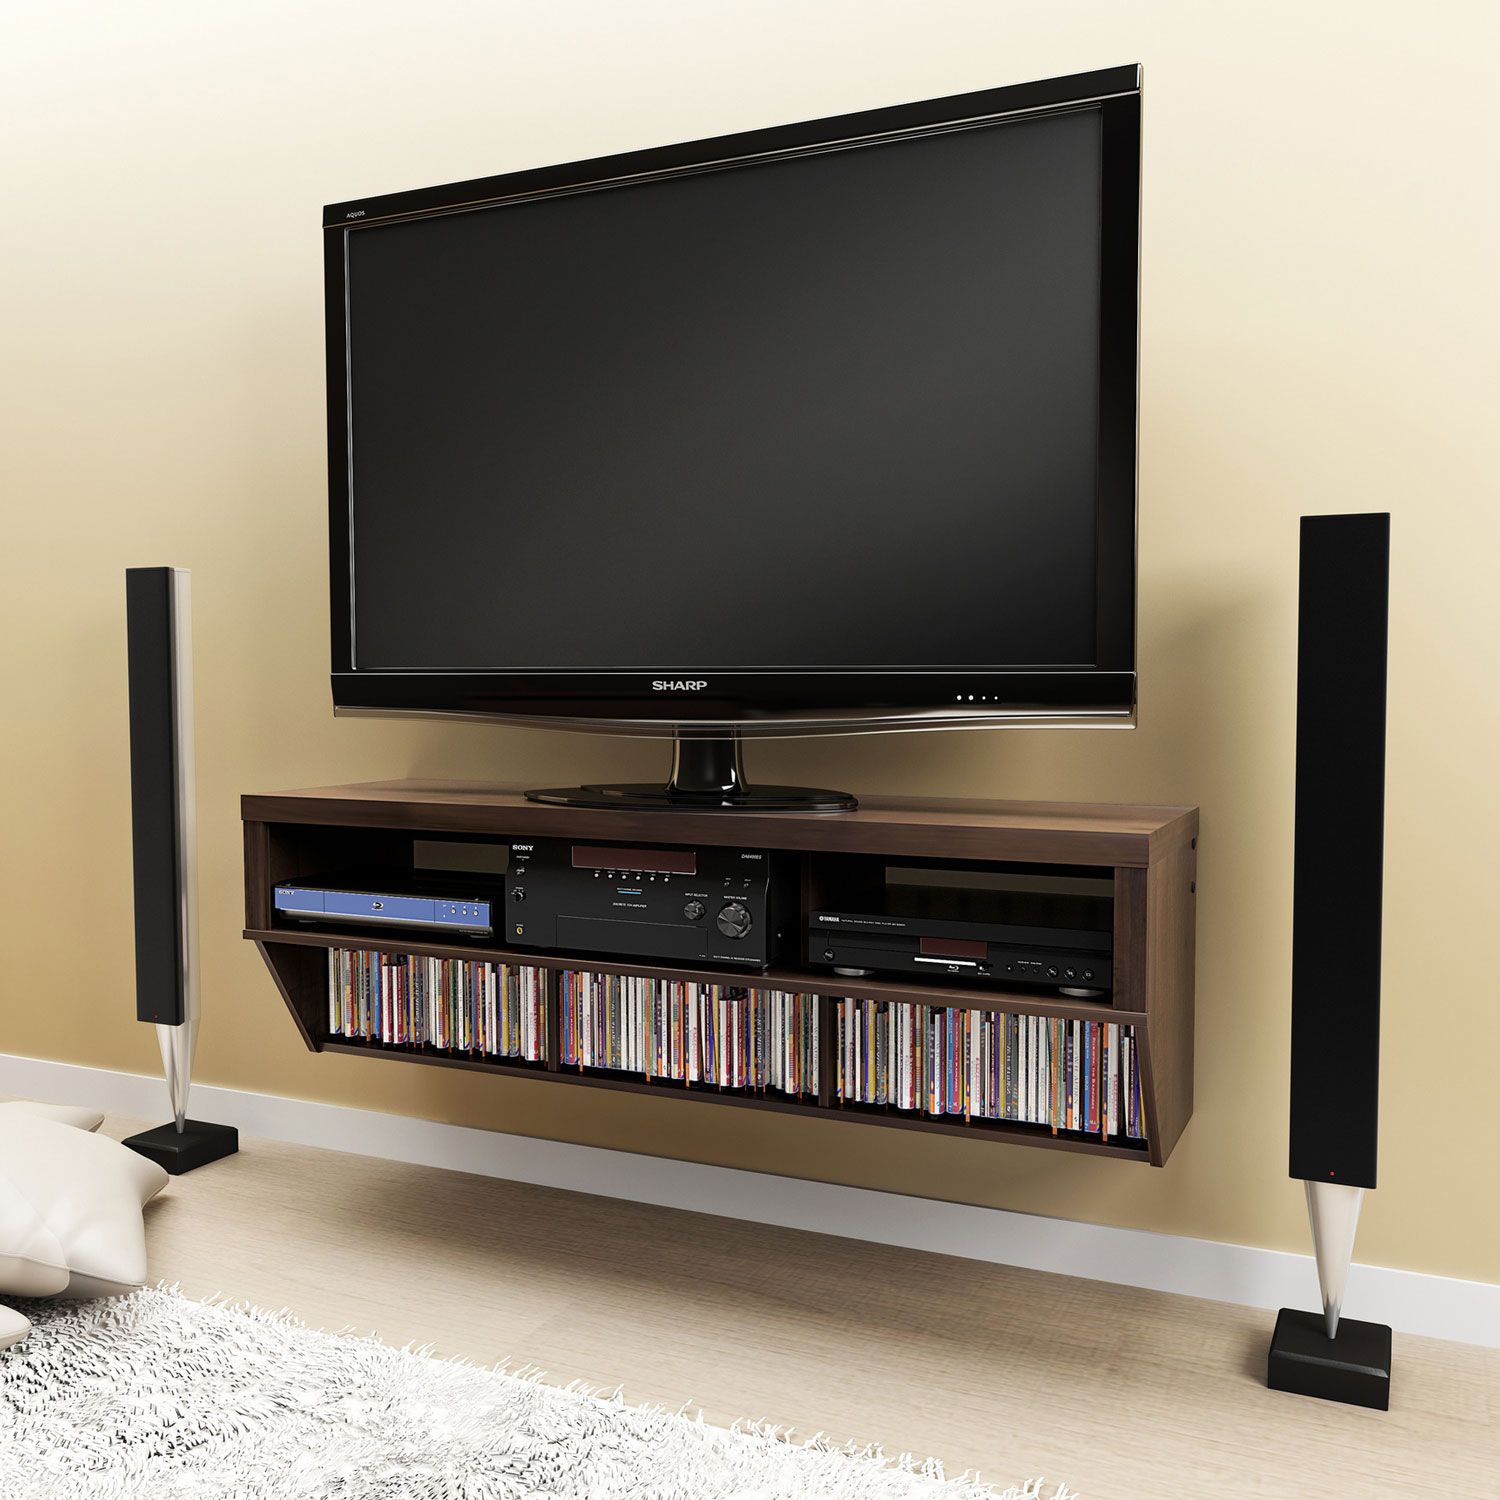 Cool Flat Screen Tv Stands With Mount – Homesfeed In Wall Mounted Tv Cabinets For Flat Screens With Doors (View 3 of 15)